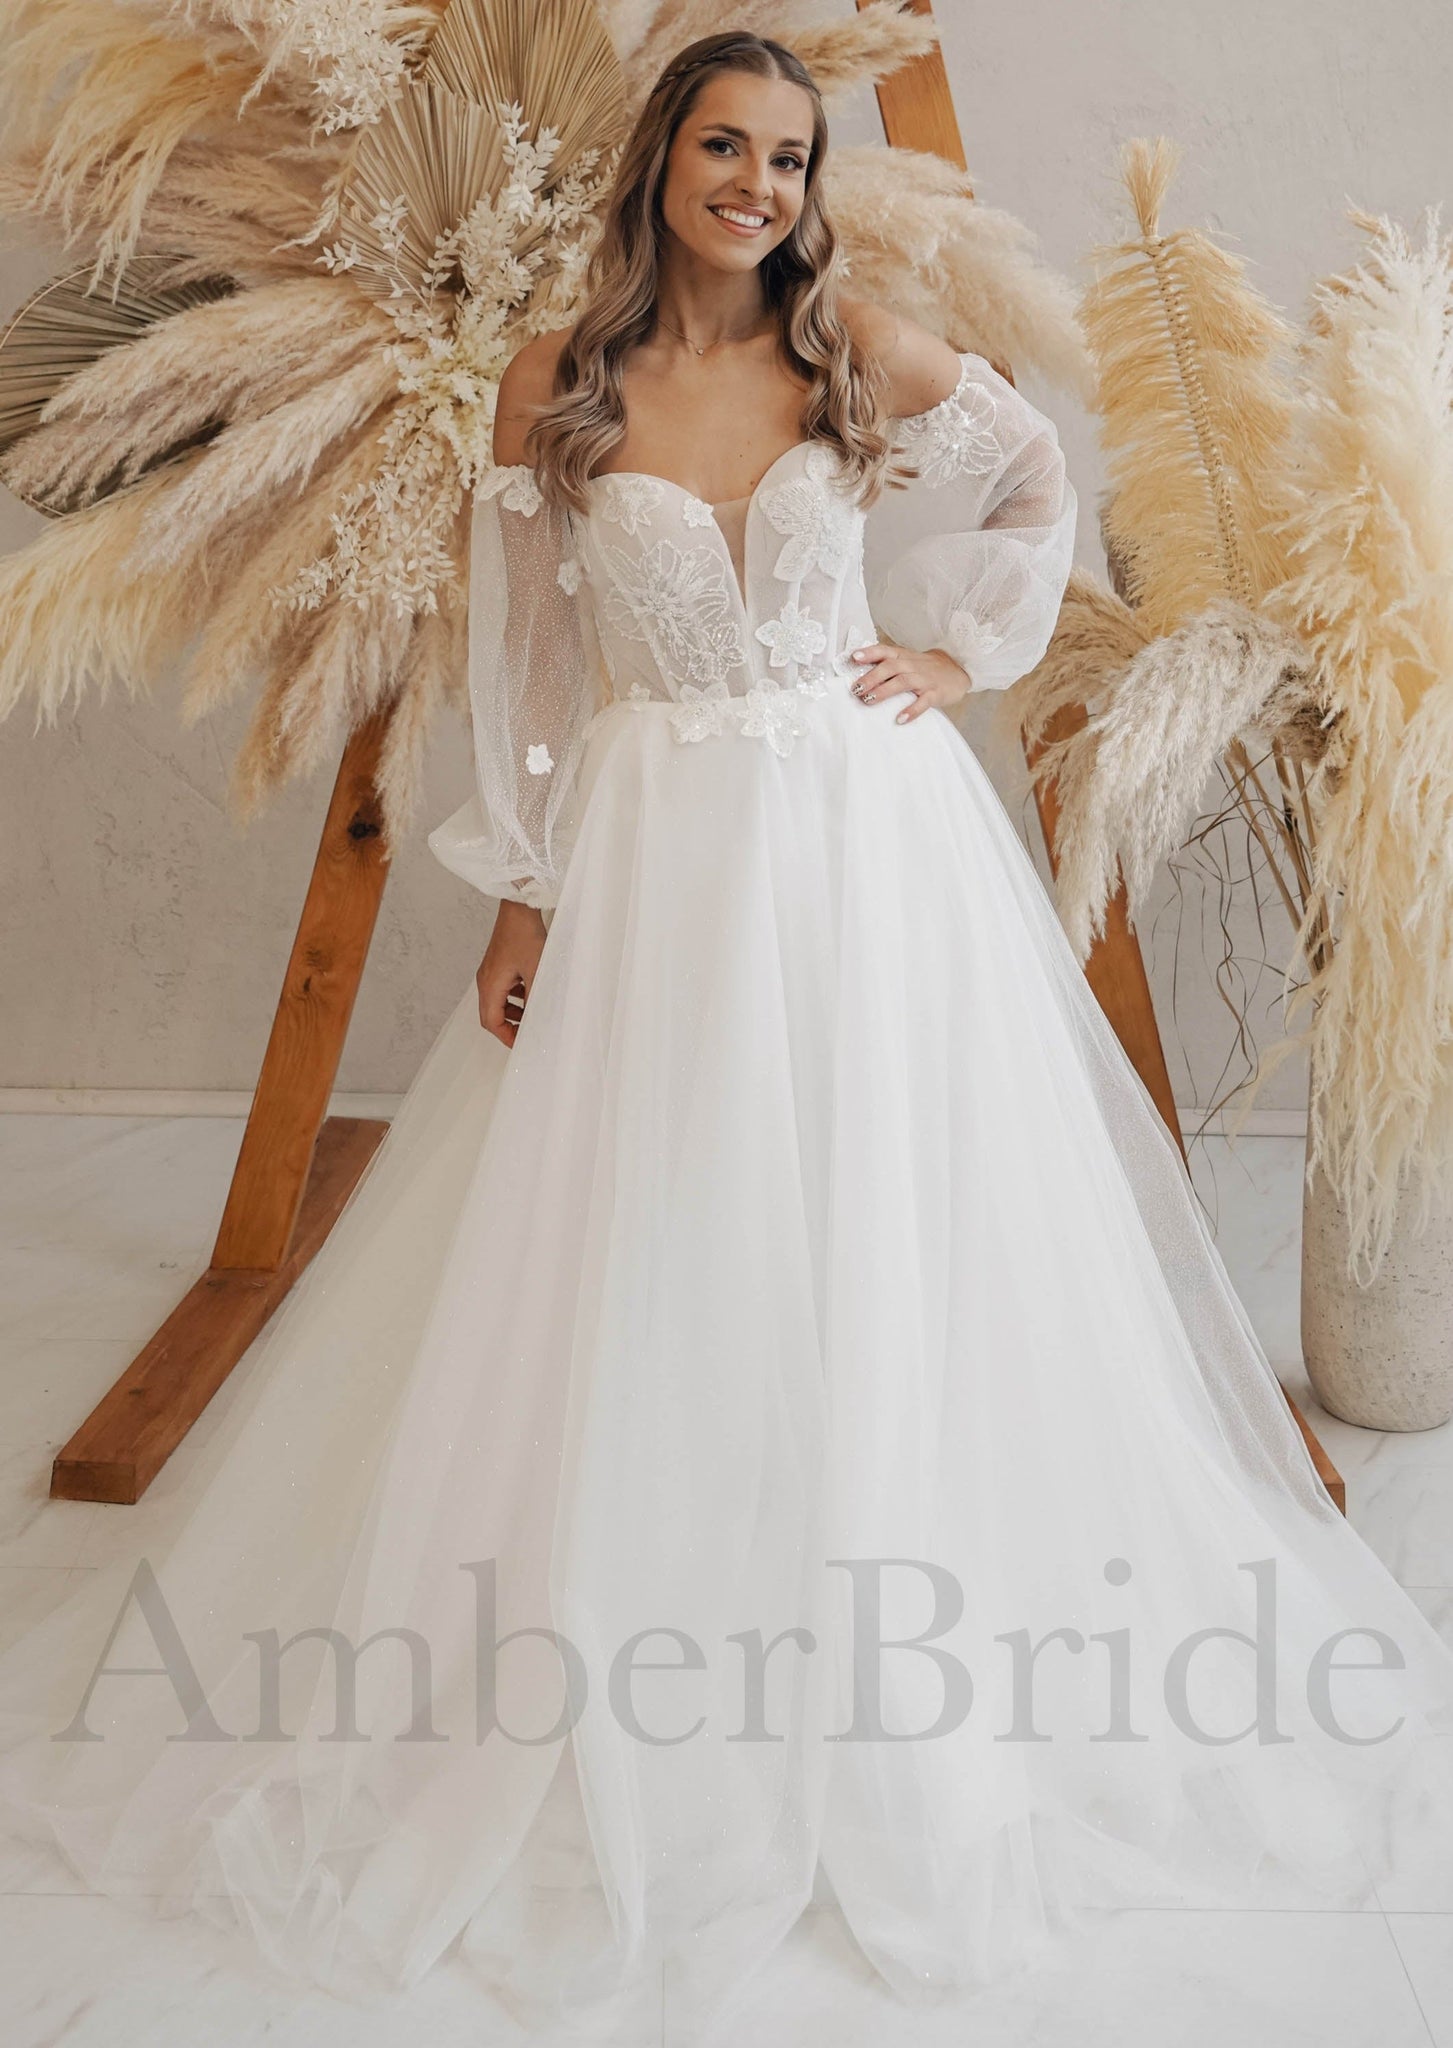 Rustic A Line Tulle Wedding Dress with Flower Appliques and Sheer Puffy Sleeves